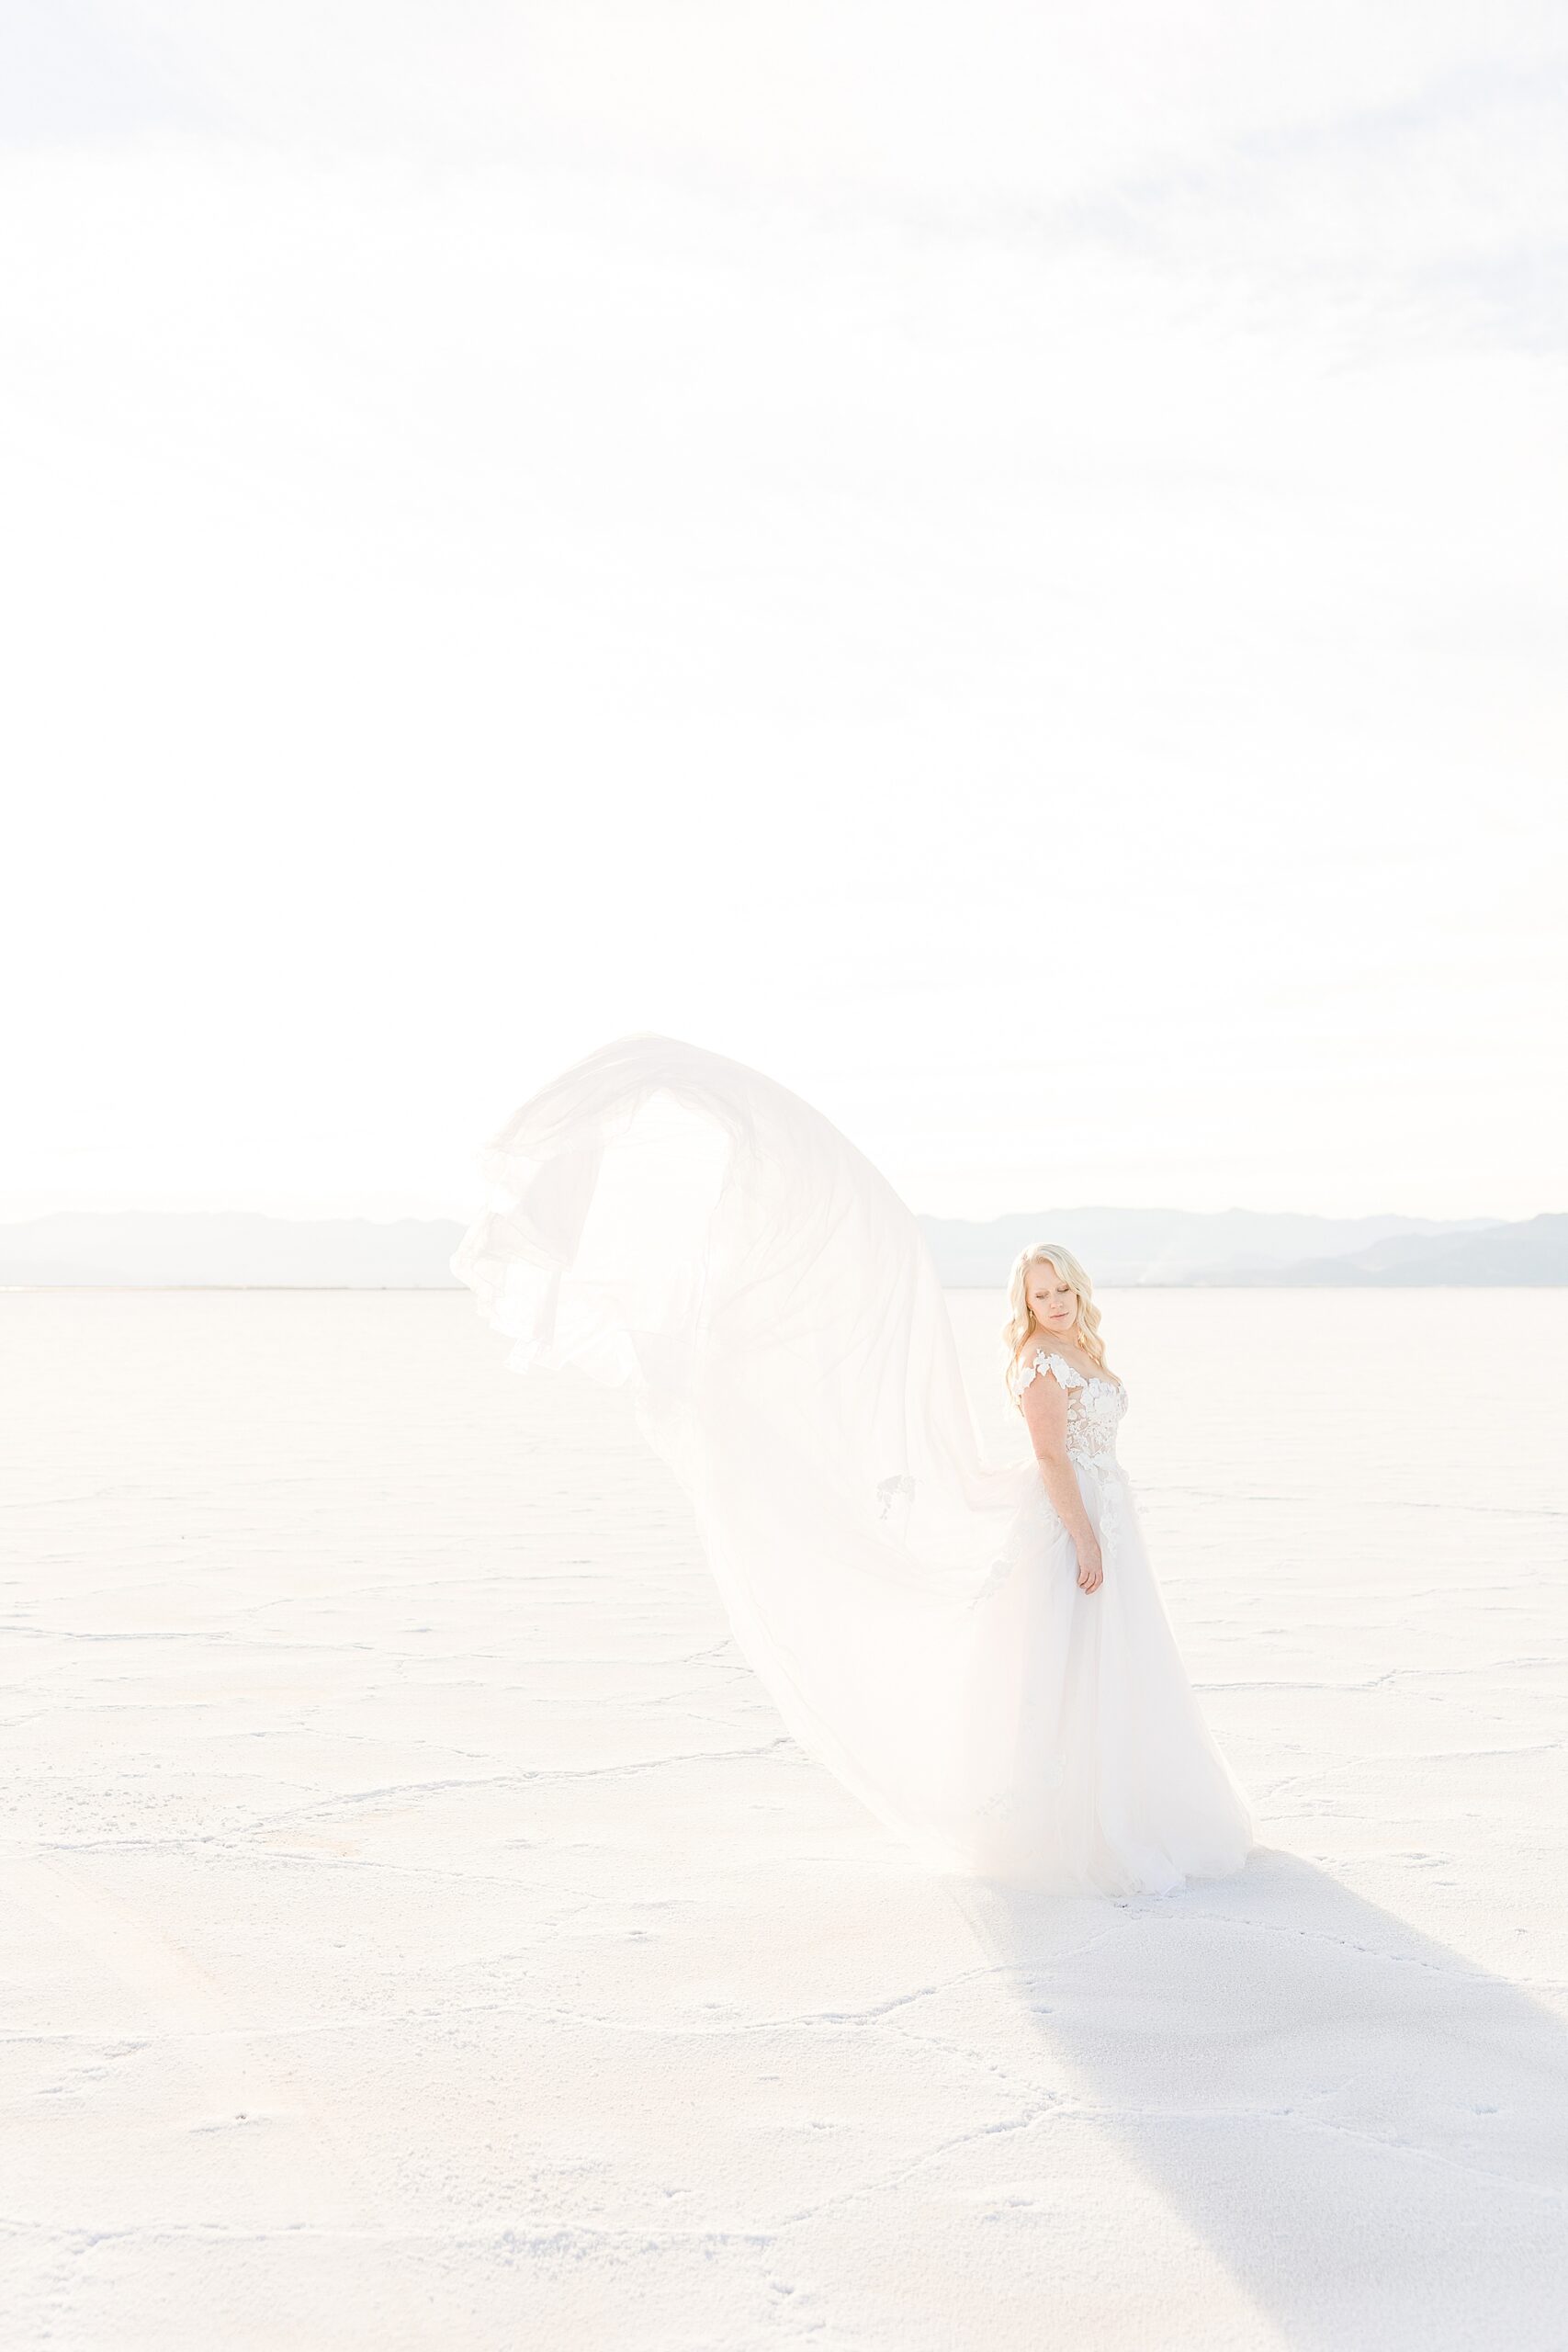 Bridal gown in the wind at the Bonneville Salt Flats